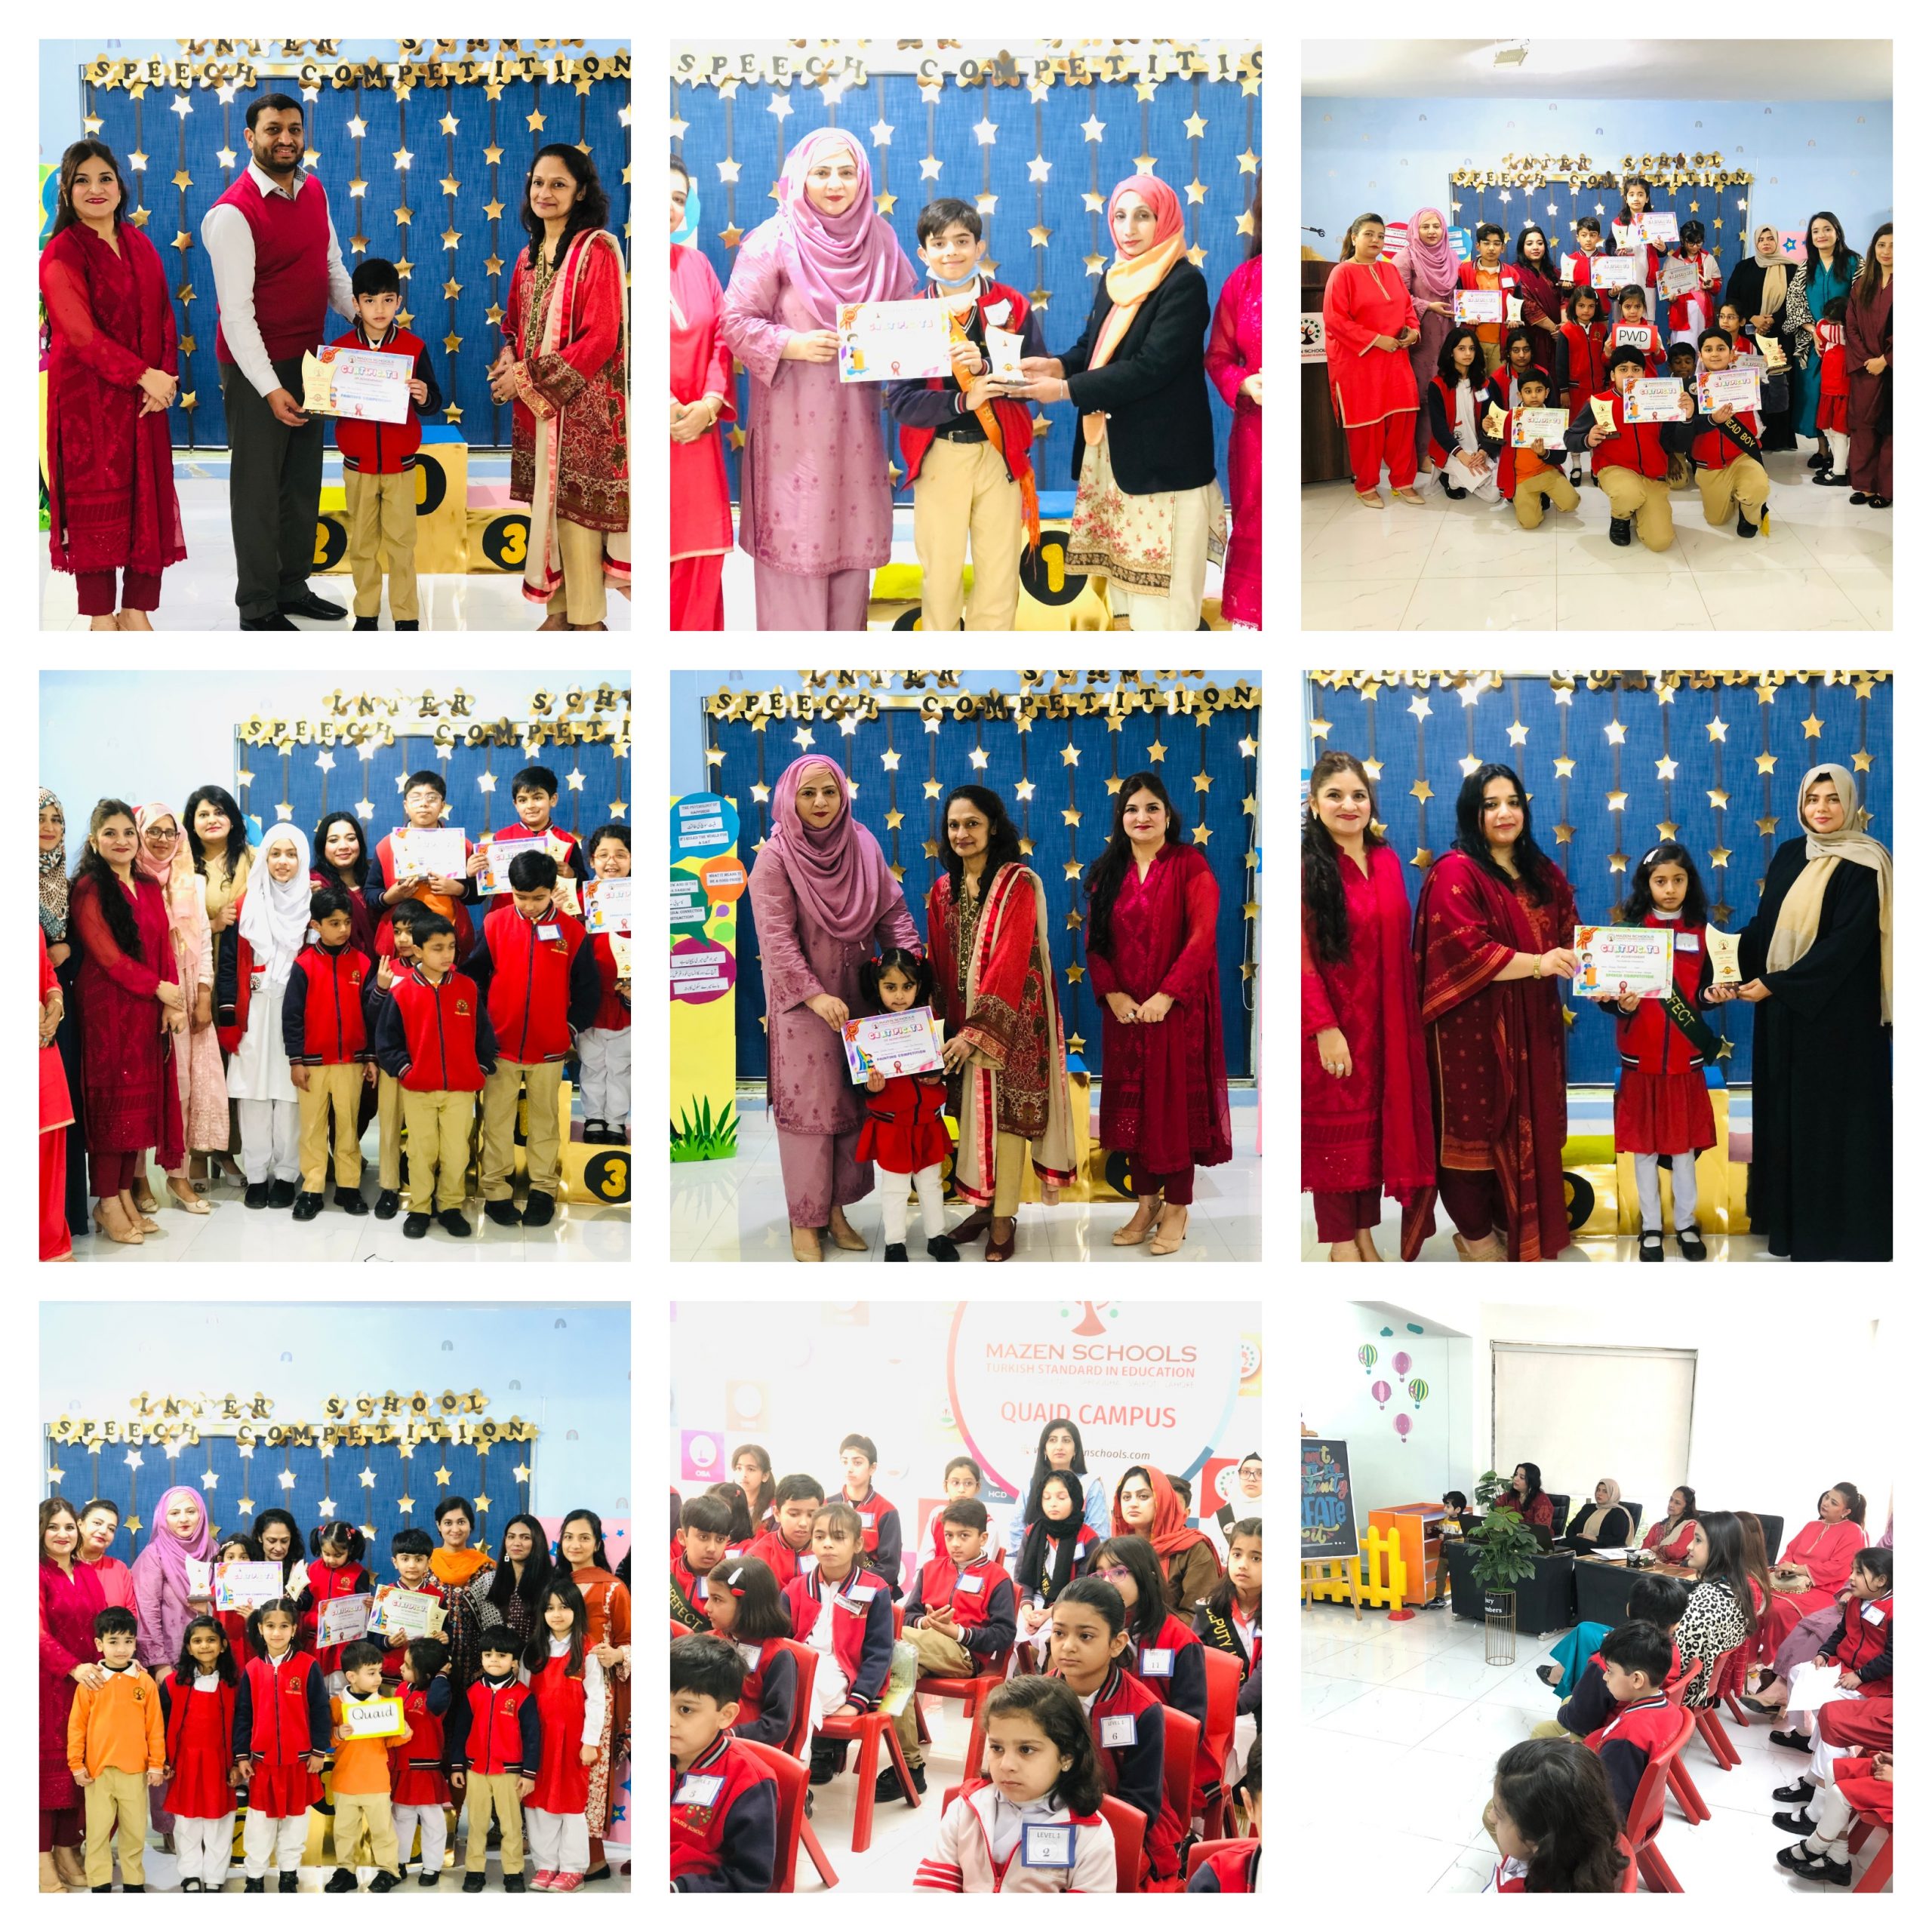 Some visuals from the Mazen School Inter-School Painting and Speech Competition